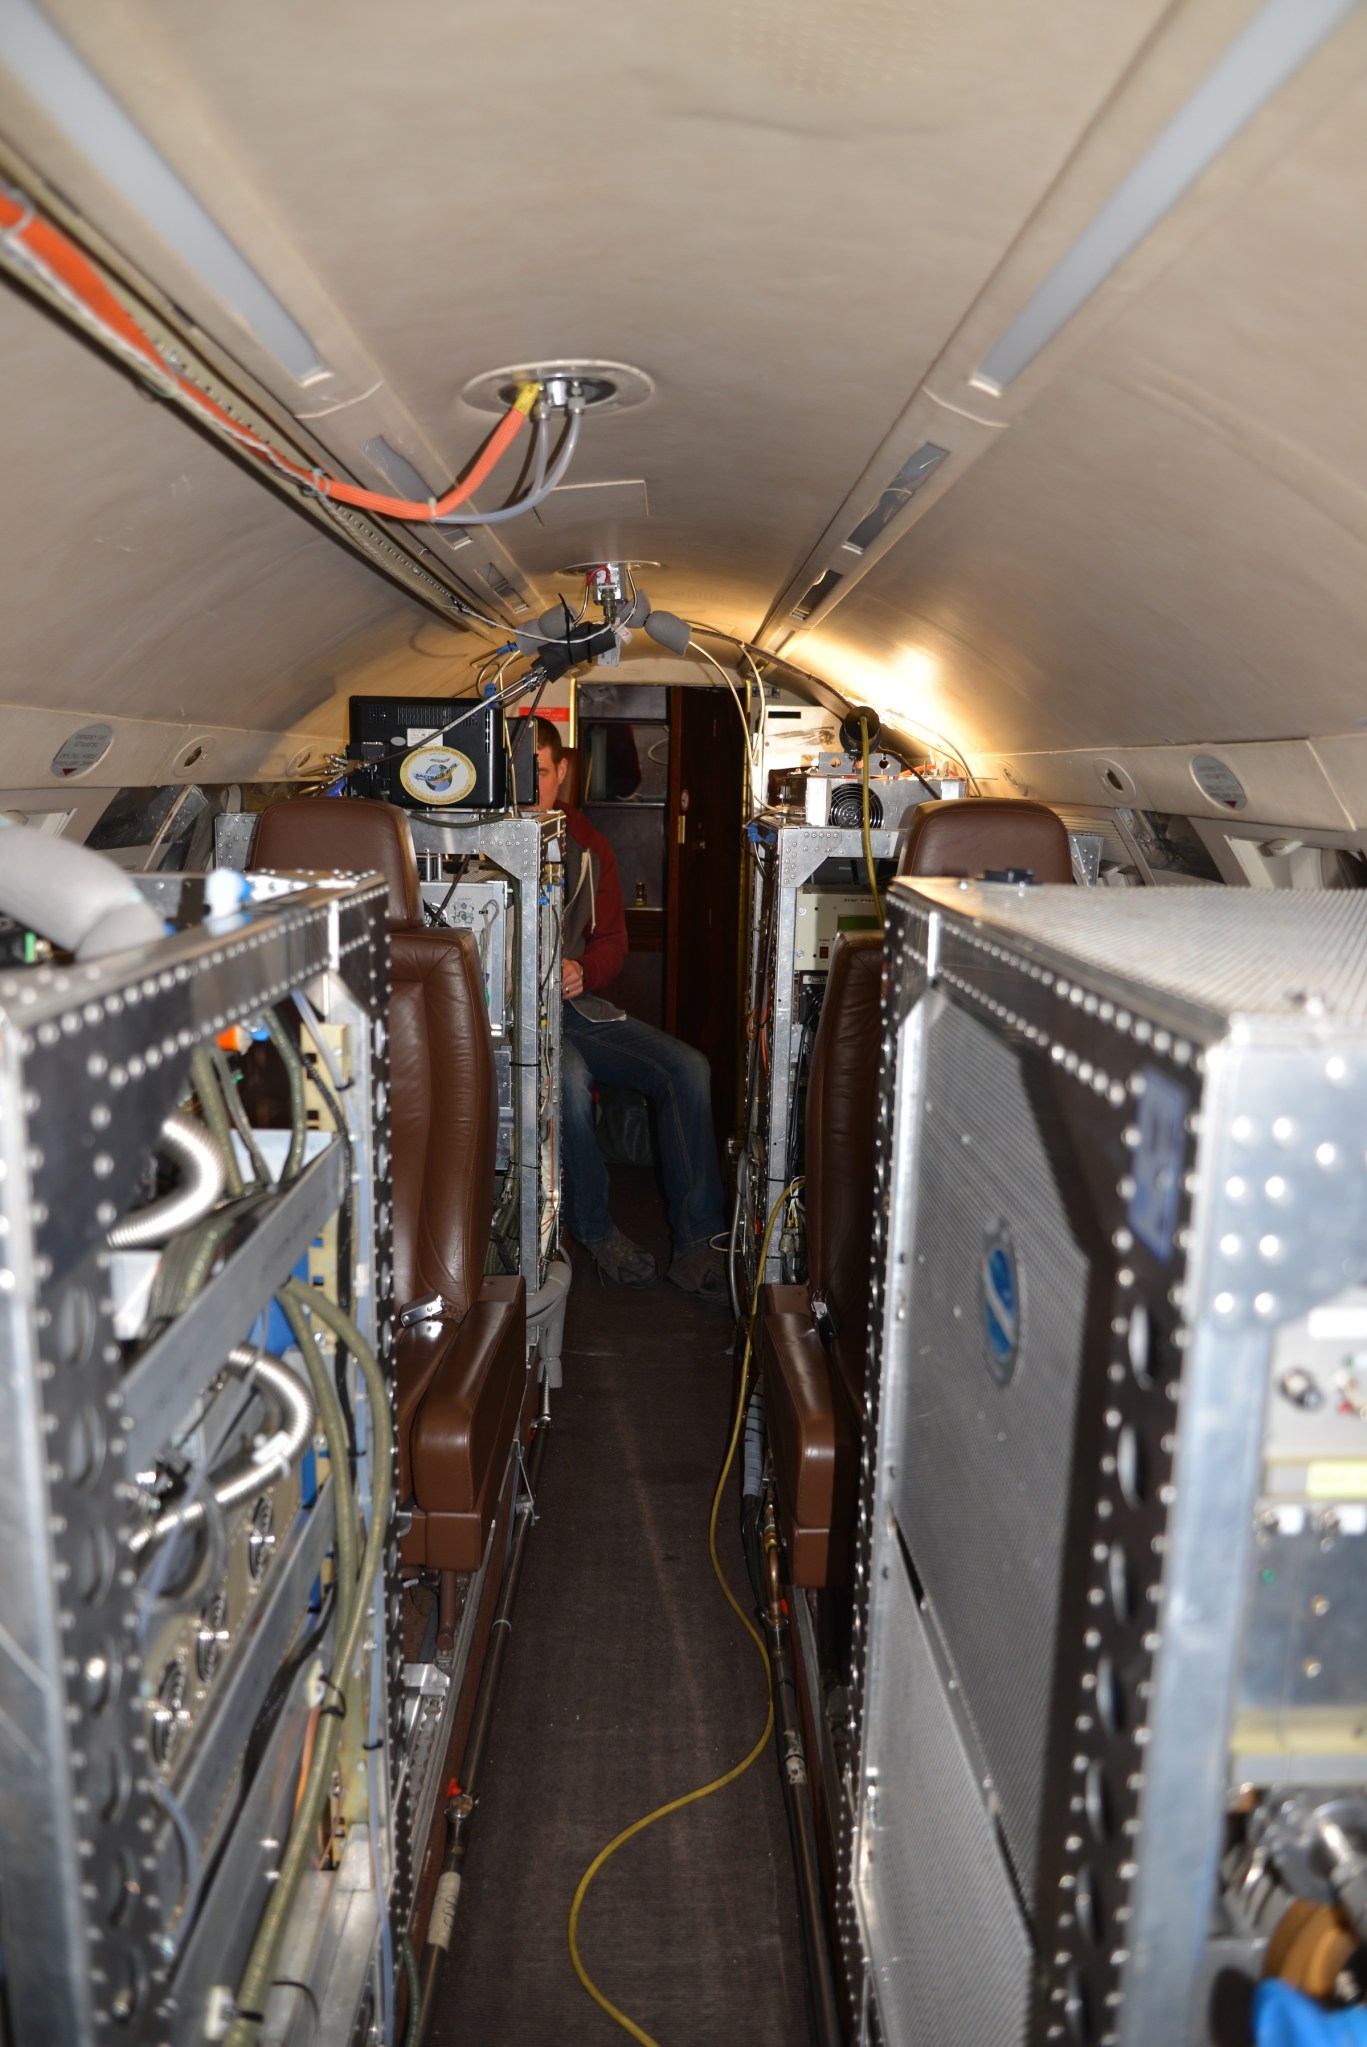 Racks of instruments inside the DLR's Falcon aircraft.